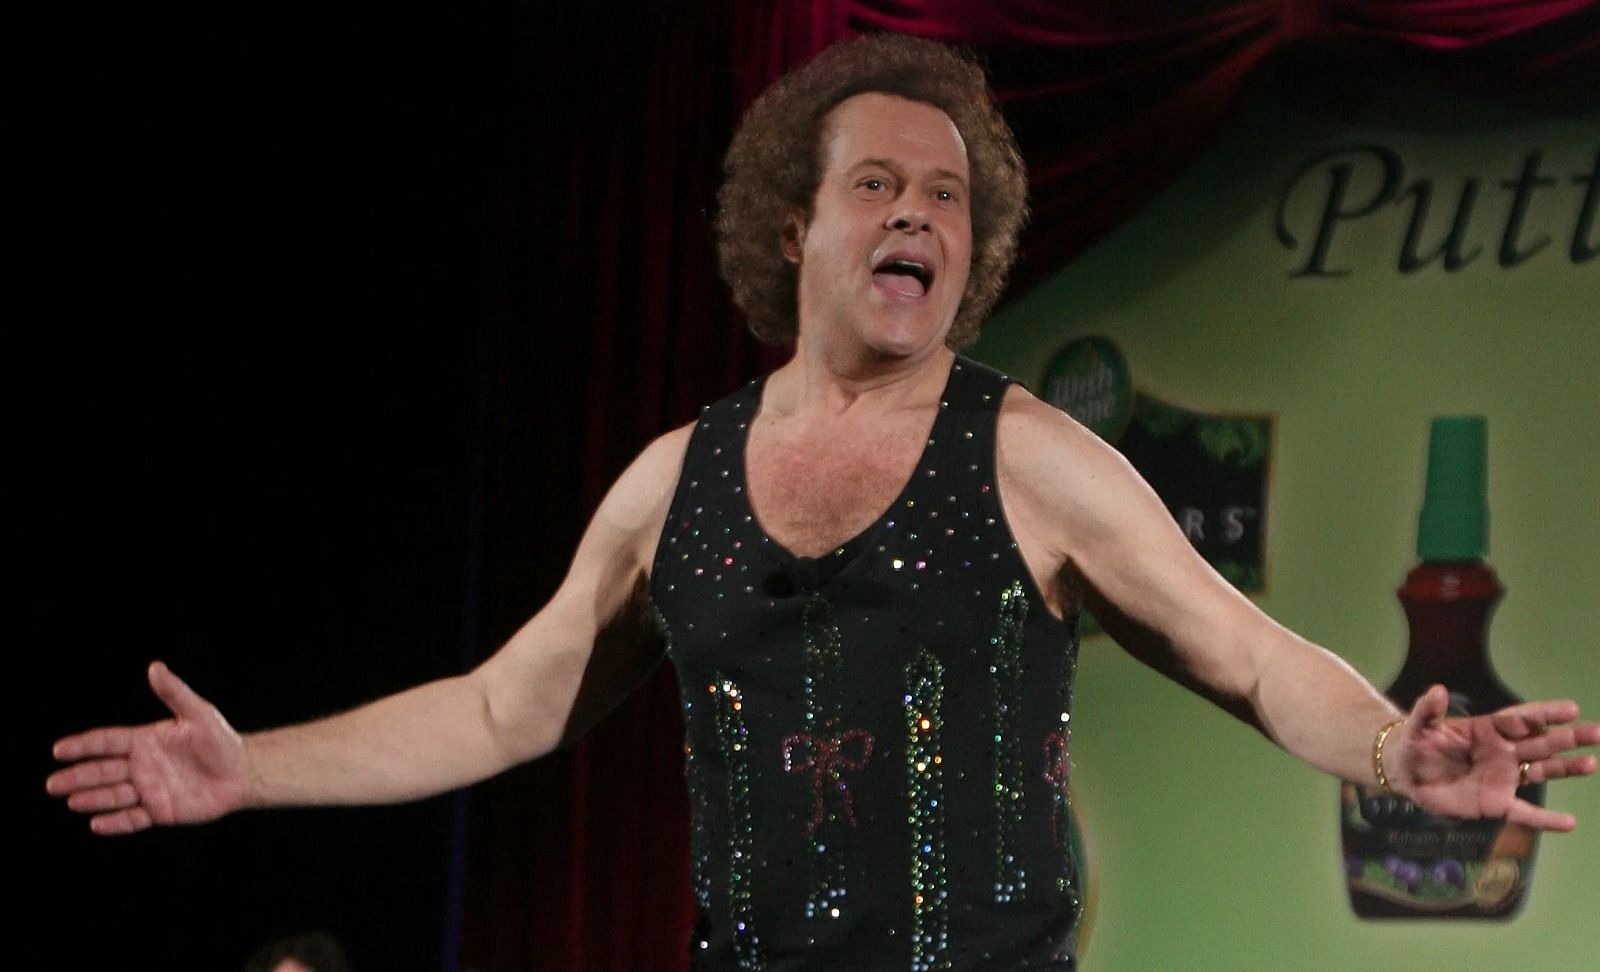 Richard Simmons workout (Image via Getty Images)